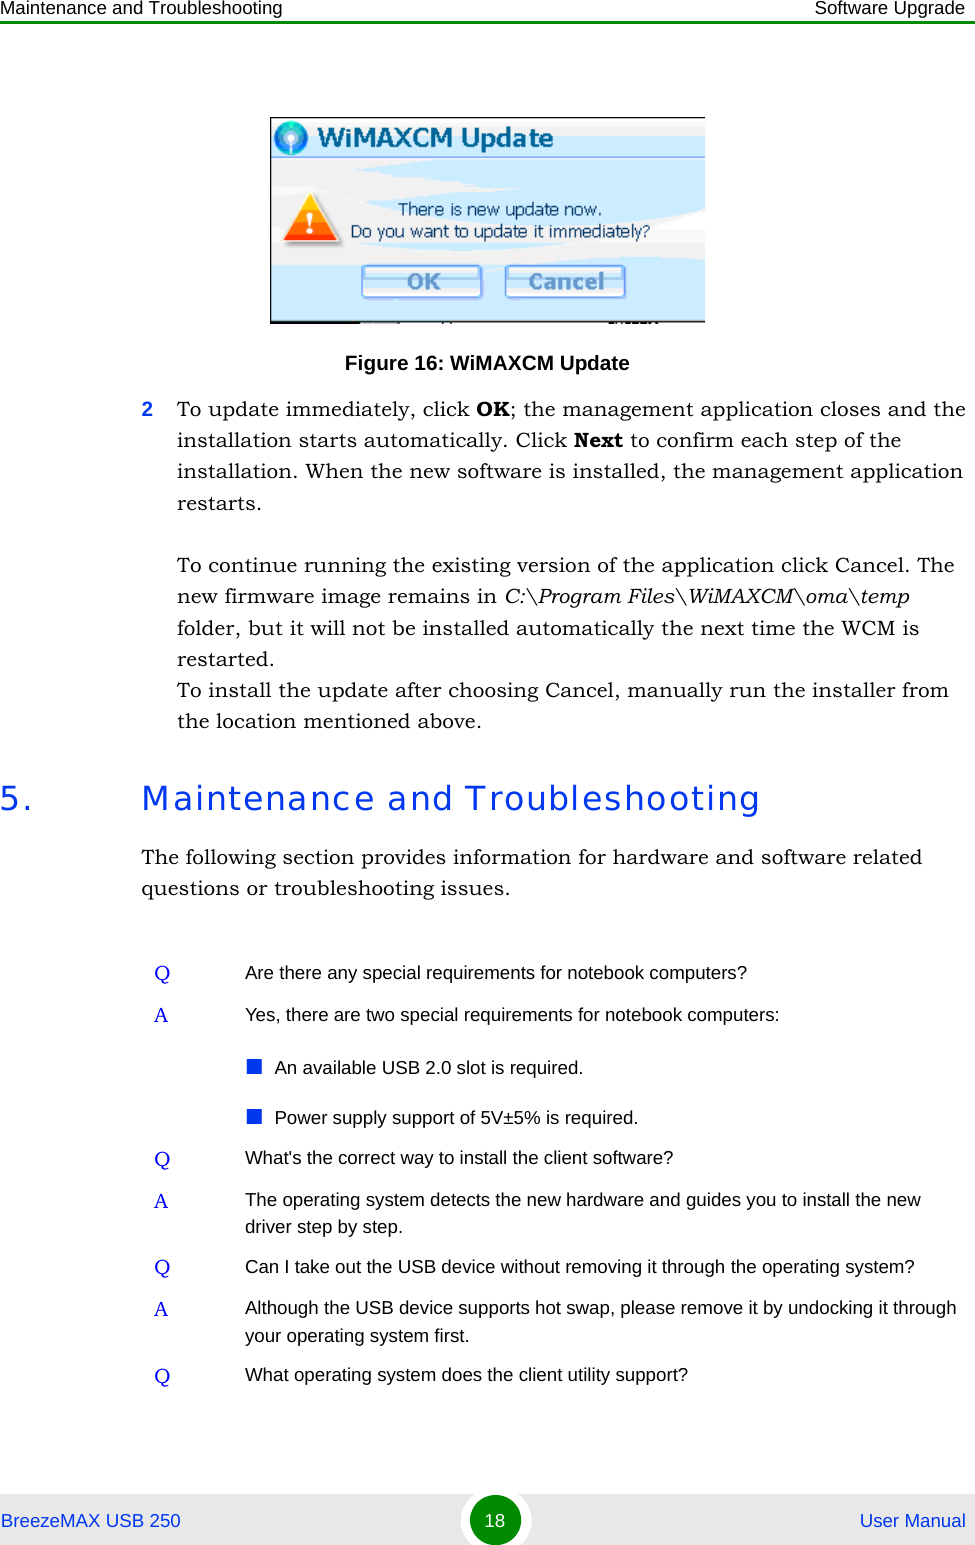 Maintenance and Troubleshooting Software UpgradeBreezeMAX USB 250 18  User Manual2To update immediately, click OK; the management application closes and the installation starts automatically. Click Next to confirm each step of the installation. When the new software is installed, the management application restarts.To continue running the existing version of the application click Cancel. The new firmware image remains in C:\Program Files\WiMAXCM\oma\temp folder, but it will not be installed automatically the next time the WCM is restarted. To install the update after choosing Cancel, manually run the installer from the location mentioned above.5. Maintenance and TroubleshootingThe following section provides information for hardware and software related questions or troubleshooting issues.Figure 16: WiMAXCM UpdateQAre there any special requirements for notebook computers?AYes, there are two special requirements for notebook computers:An available USB 2.0 slot is required.Power supply support of 5V±5% is required.QWhat&apos;s the correct way to install the client software?AThe operating system detects the new hardware and guides you to install the new driver step by step.QCan I take out the USB device without removing it through the operating system?AAlthough the USB device supports hot swap, please remove it by undocking it through your operating system first.QWhat operating system does the client utility support?